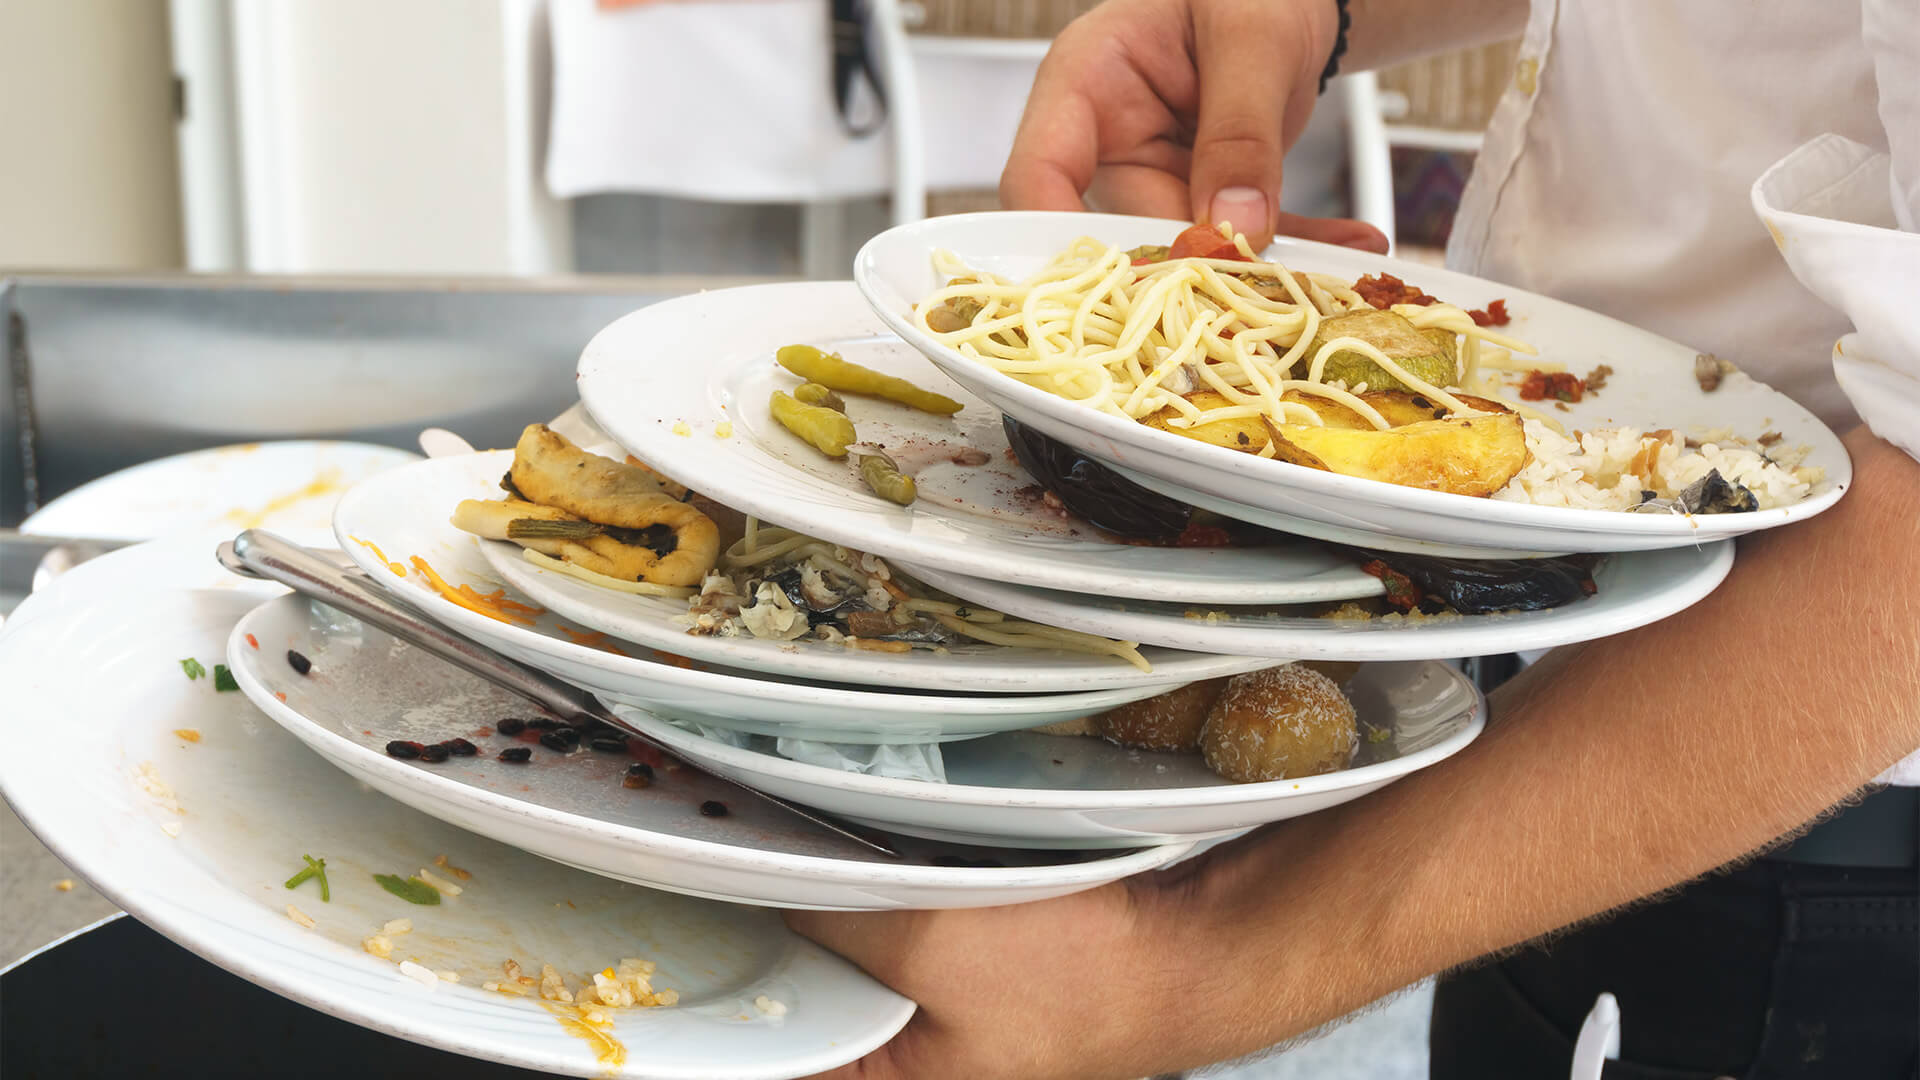 Waiter returning used plates to the kitchen with food remenants still on them